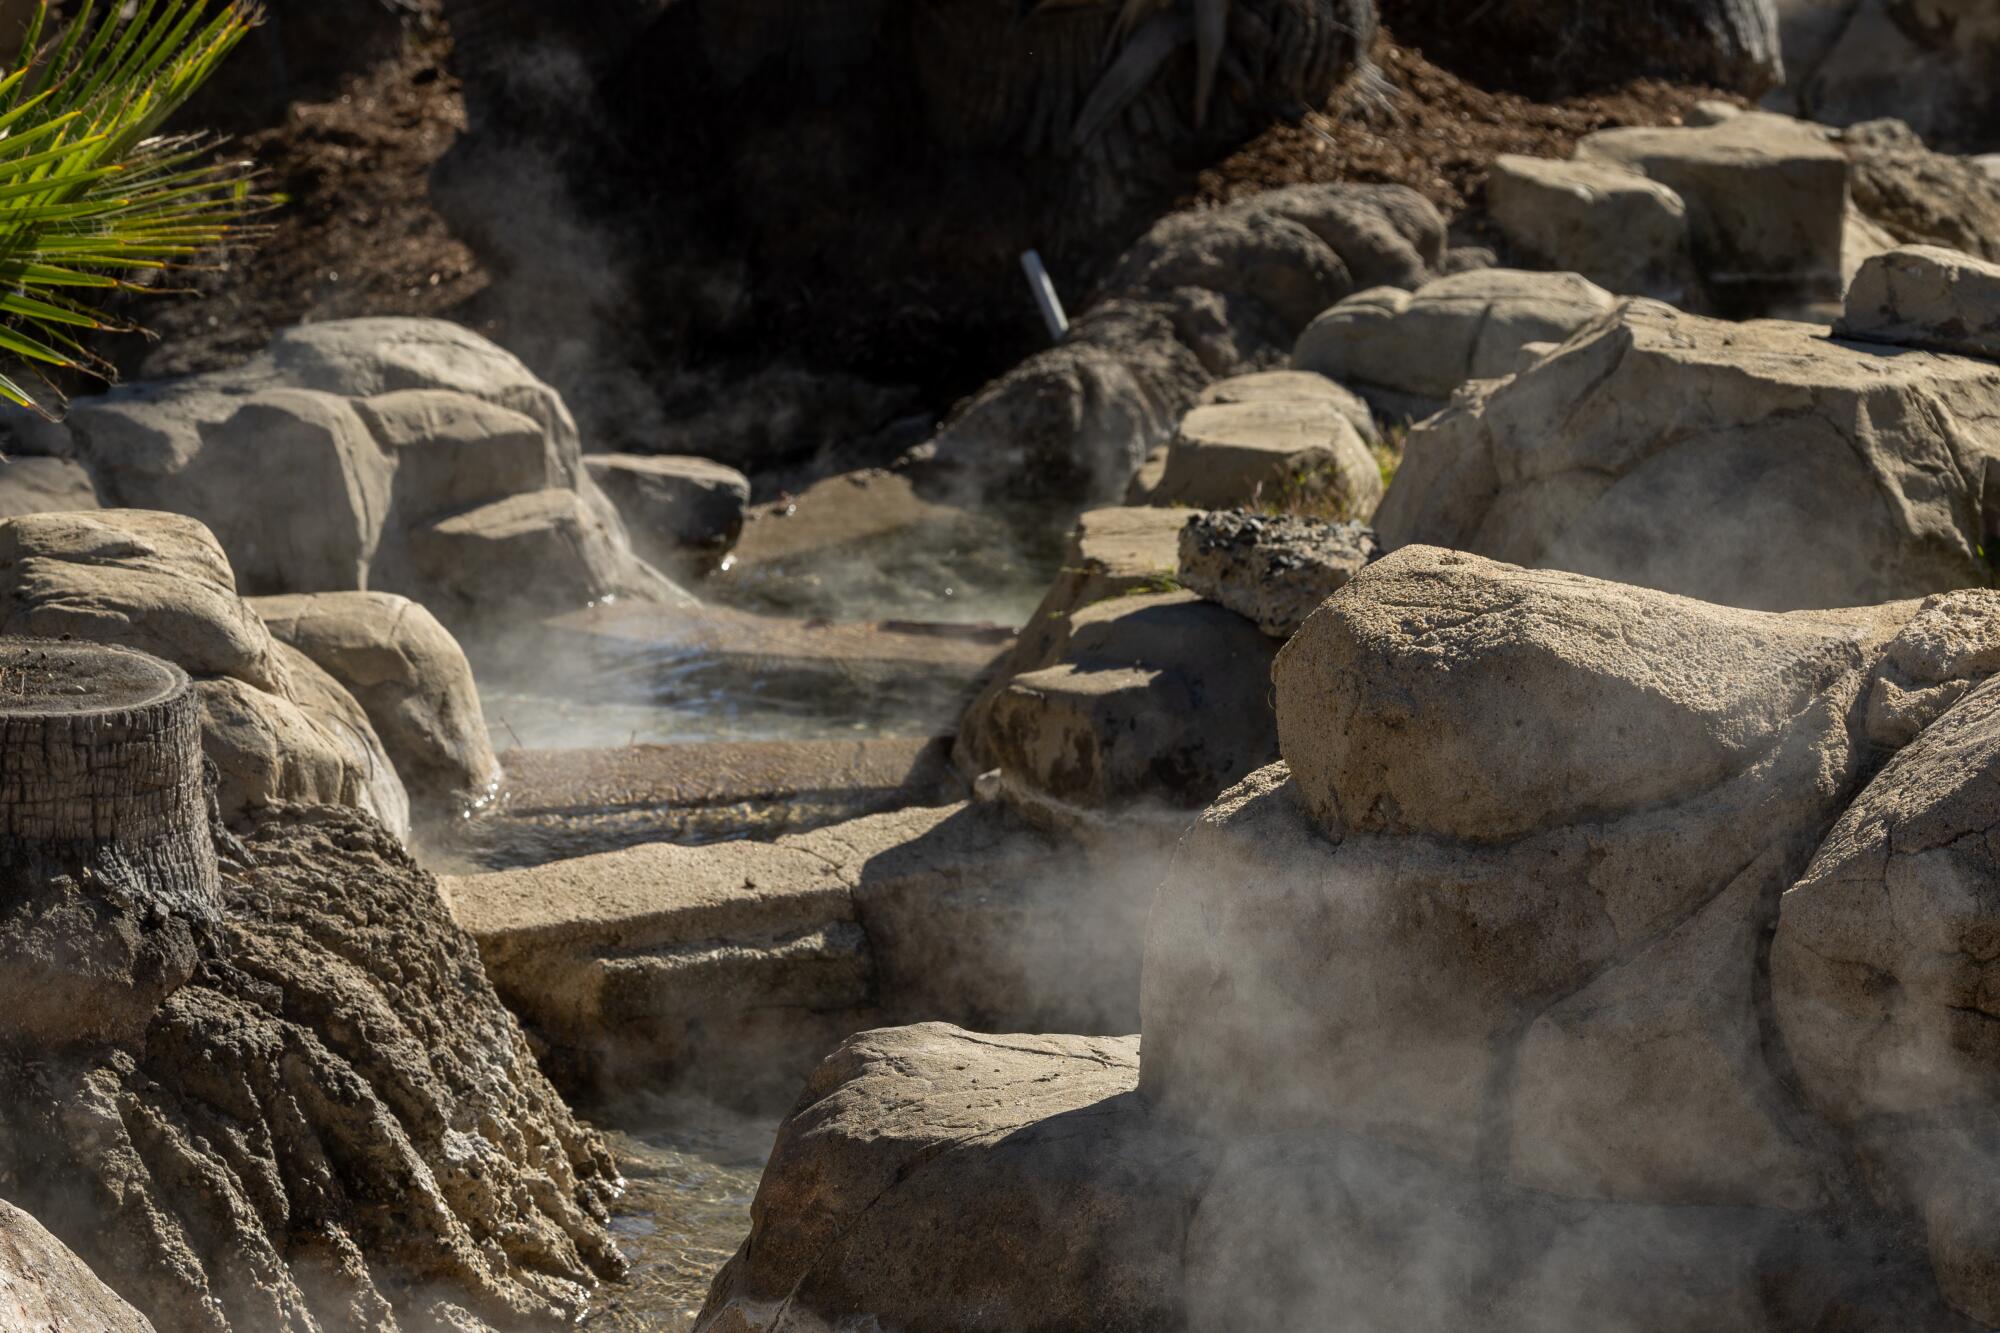 Steam rises from the geothermal water flowing among large boulders